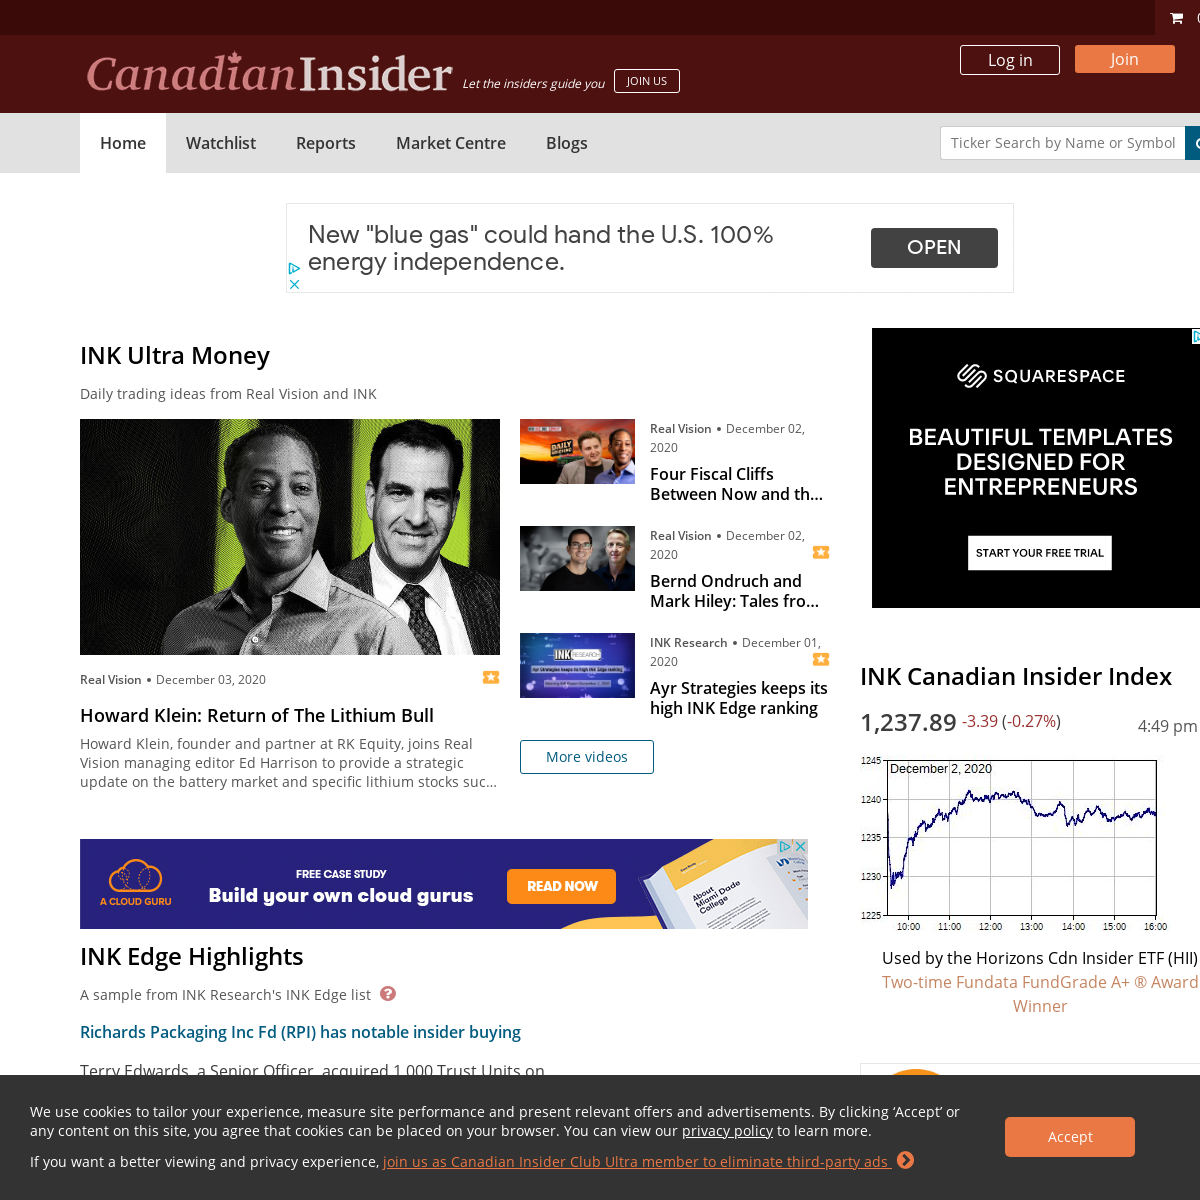 A complete backup of canadianinsider.com